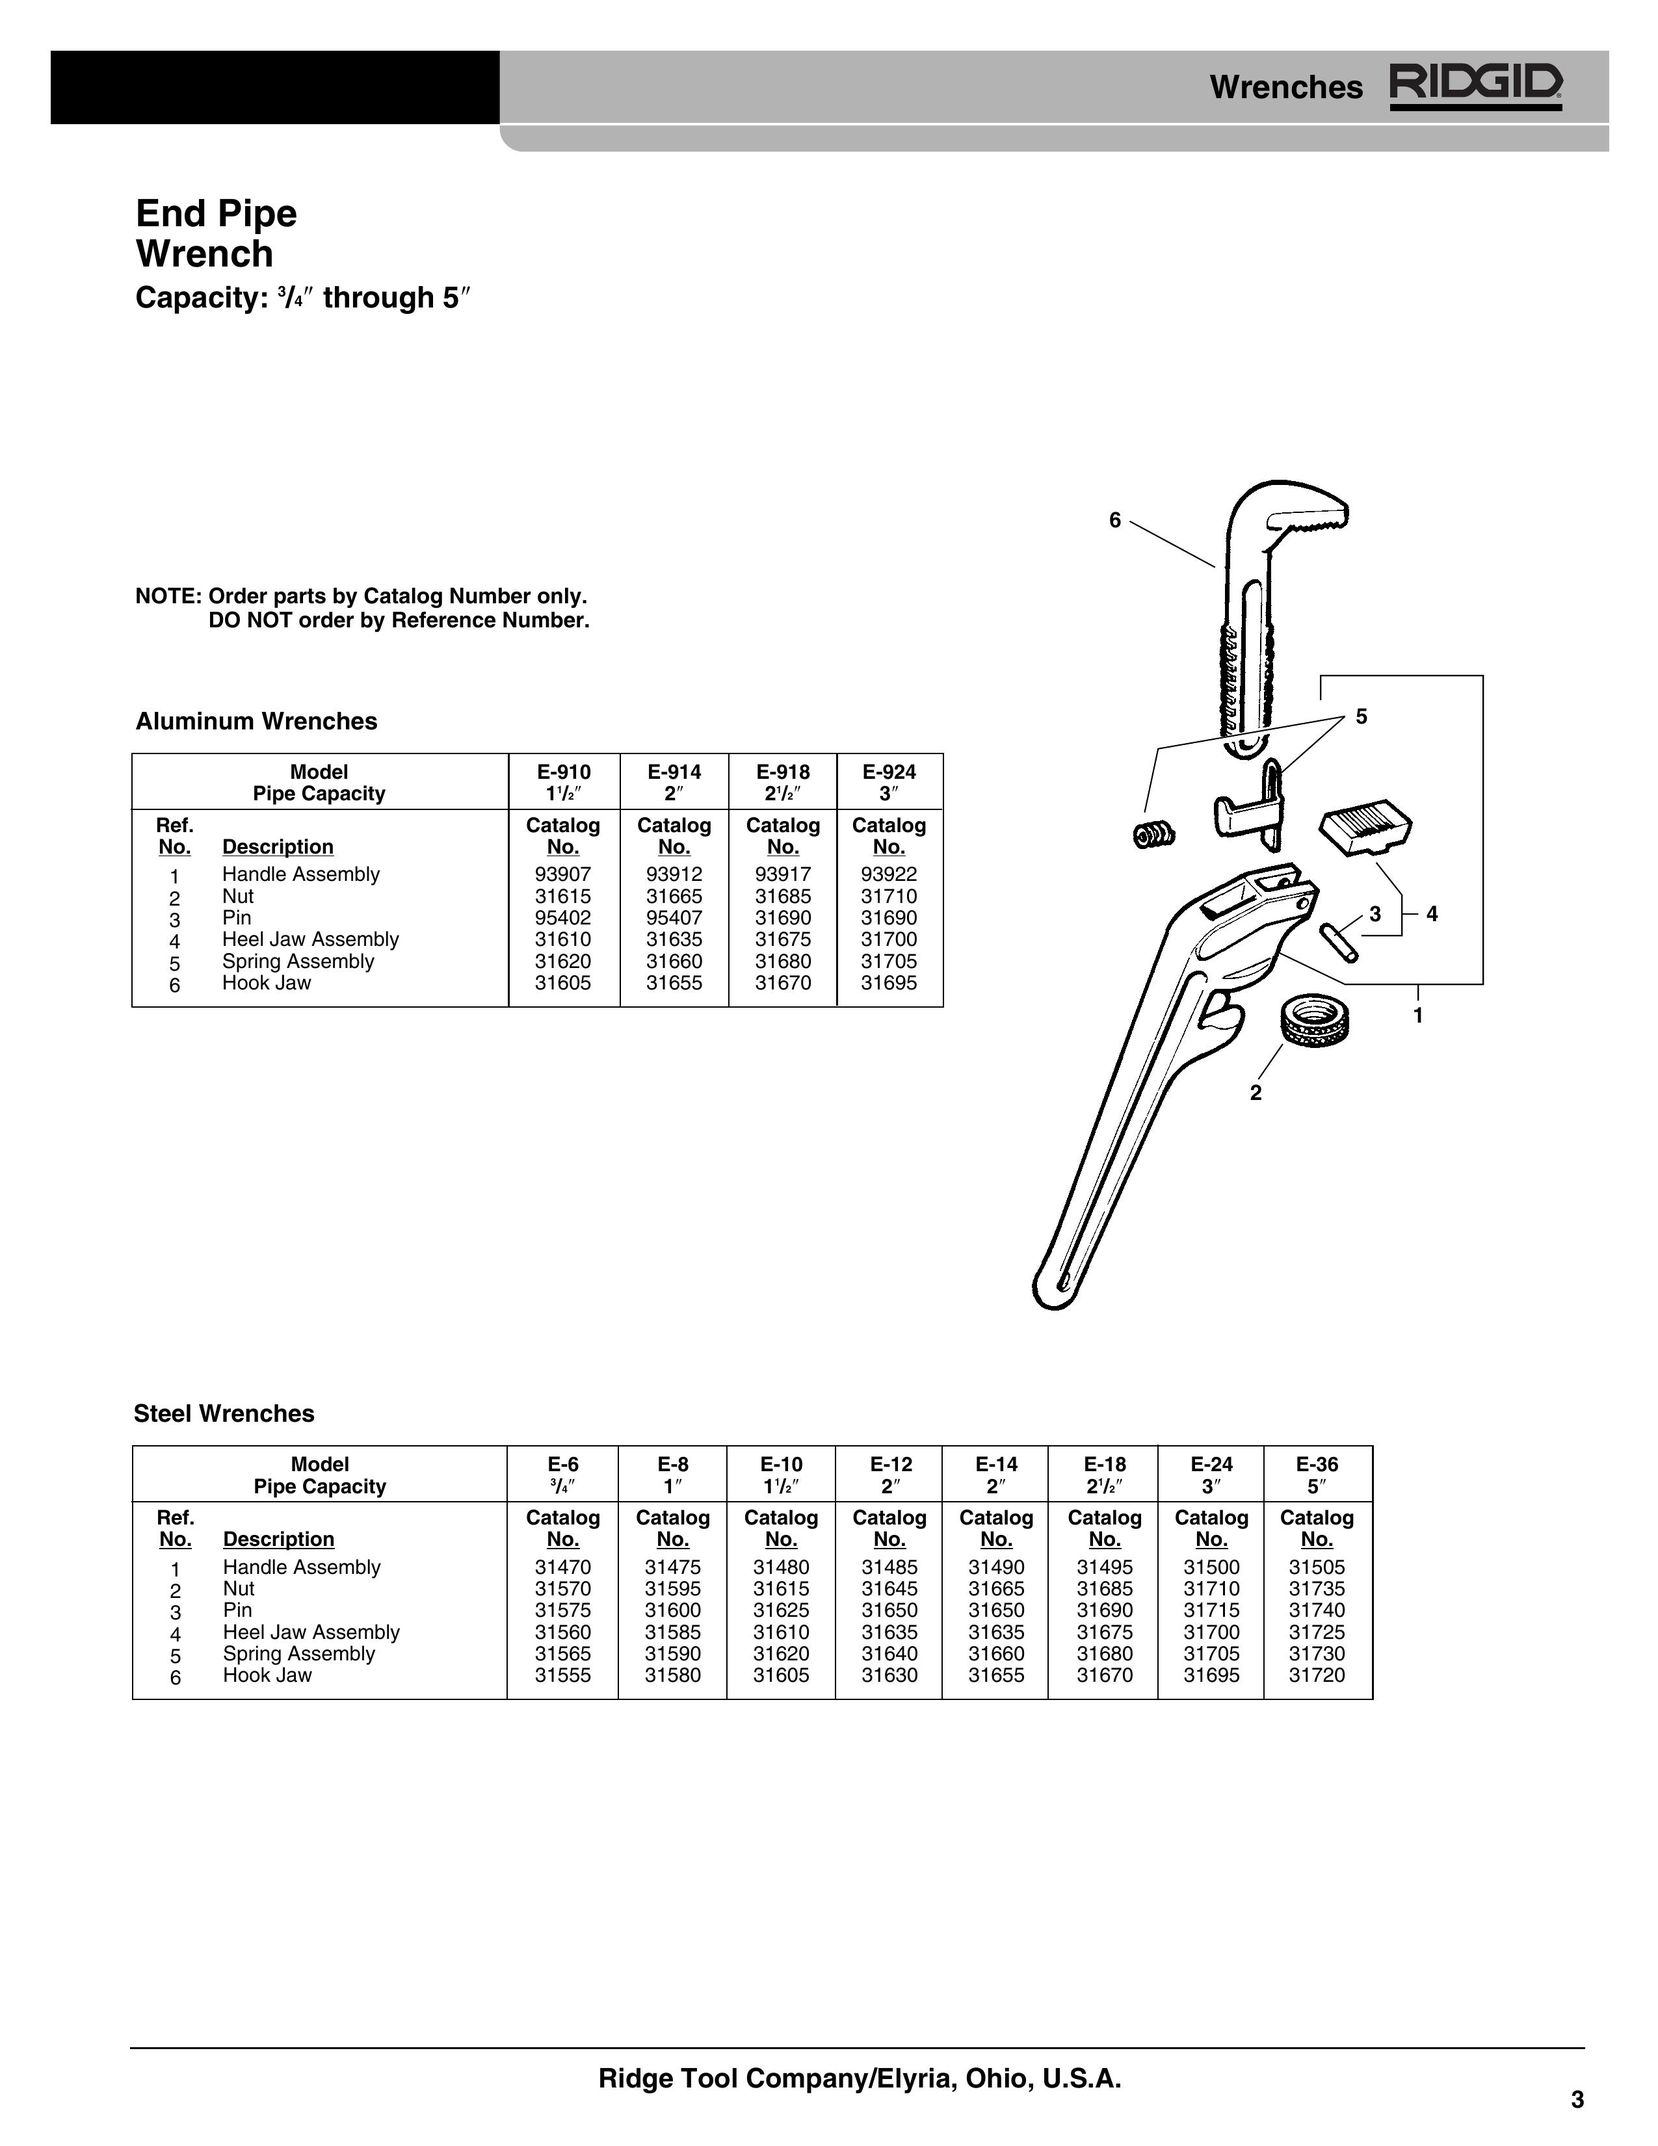 RIDGID End Pipe Wrench Impact Driver User Manual